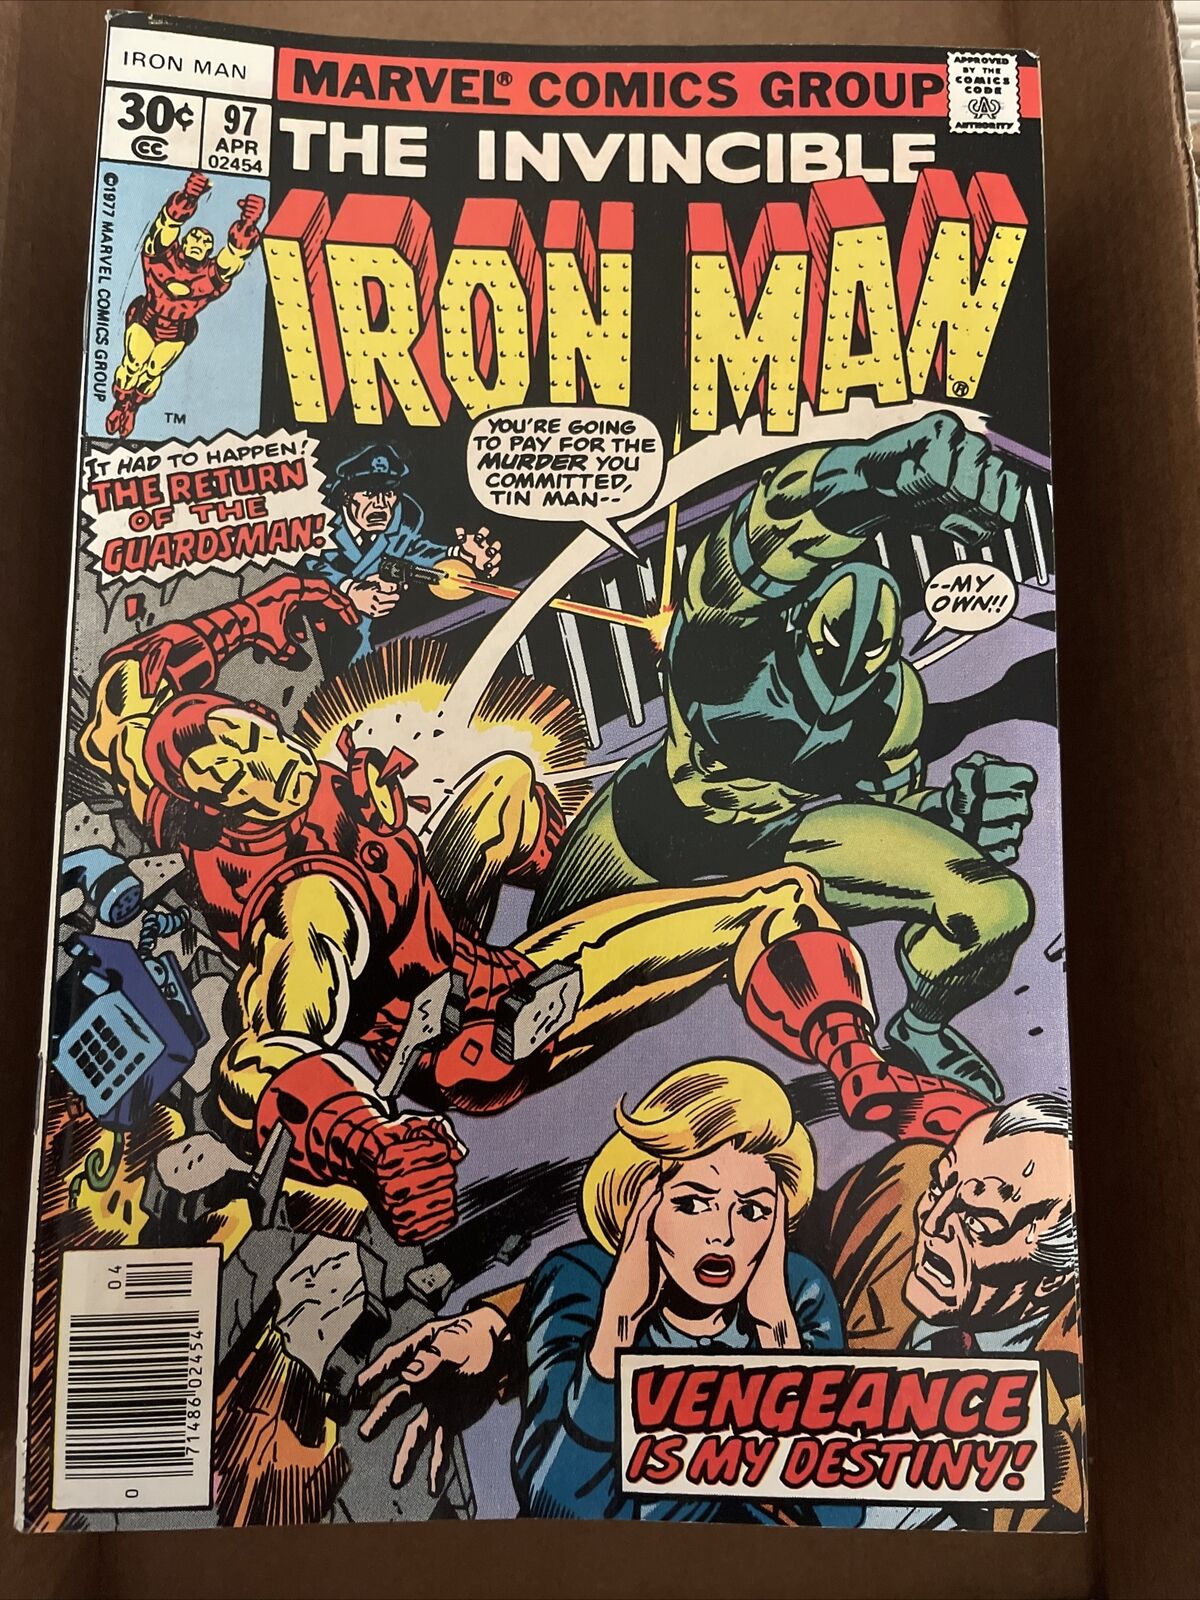 Iron Man #97 Bronze Age (1977) Shipping Included